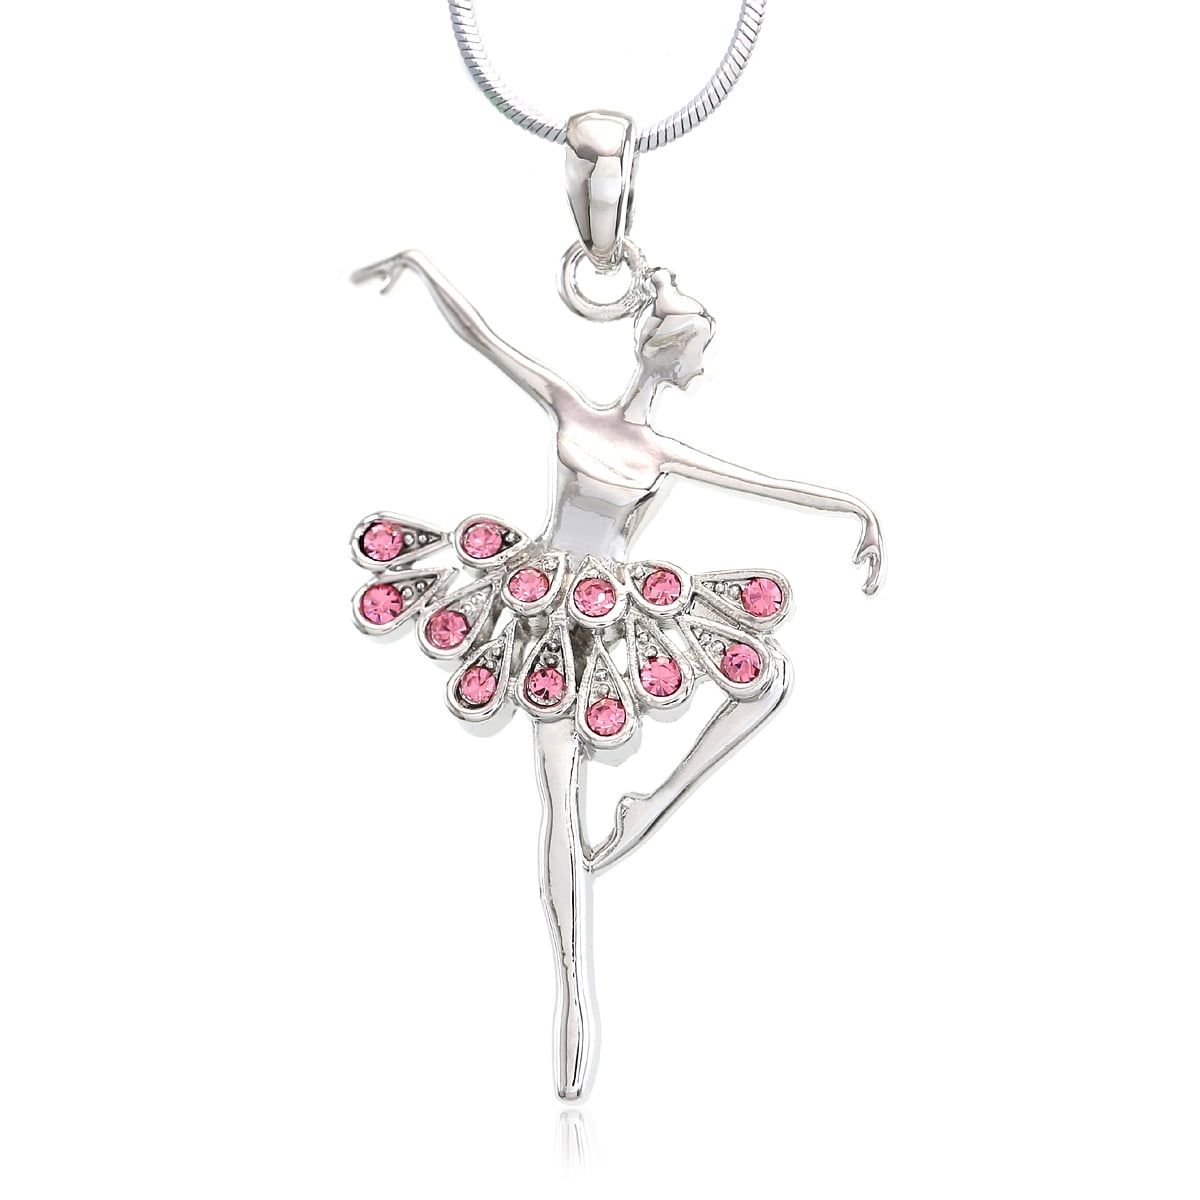 Non-brand Pack Of 50 Jewelry Making Charms Flat Ballerina Dancing Girl Pendants